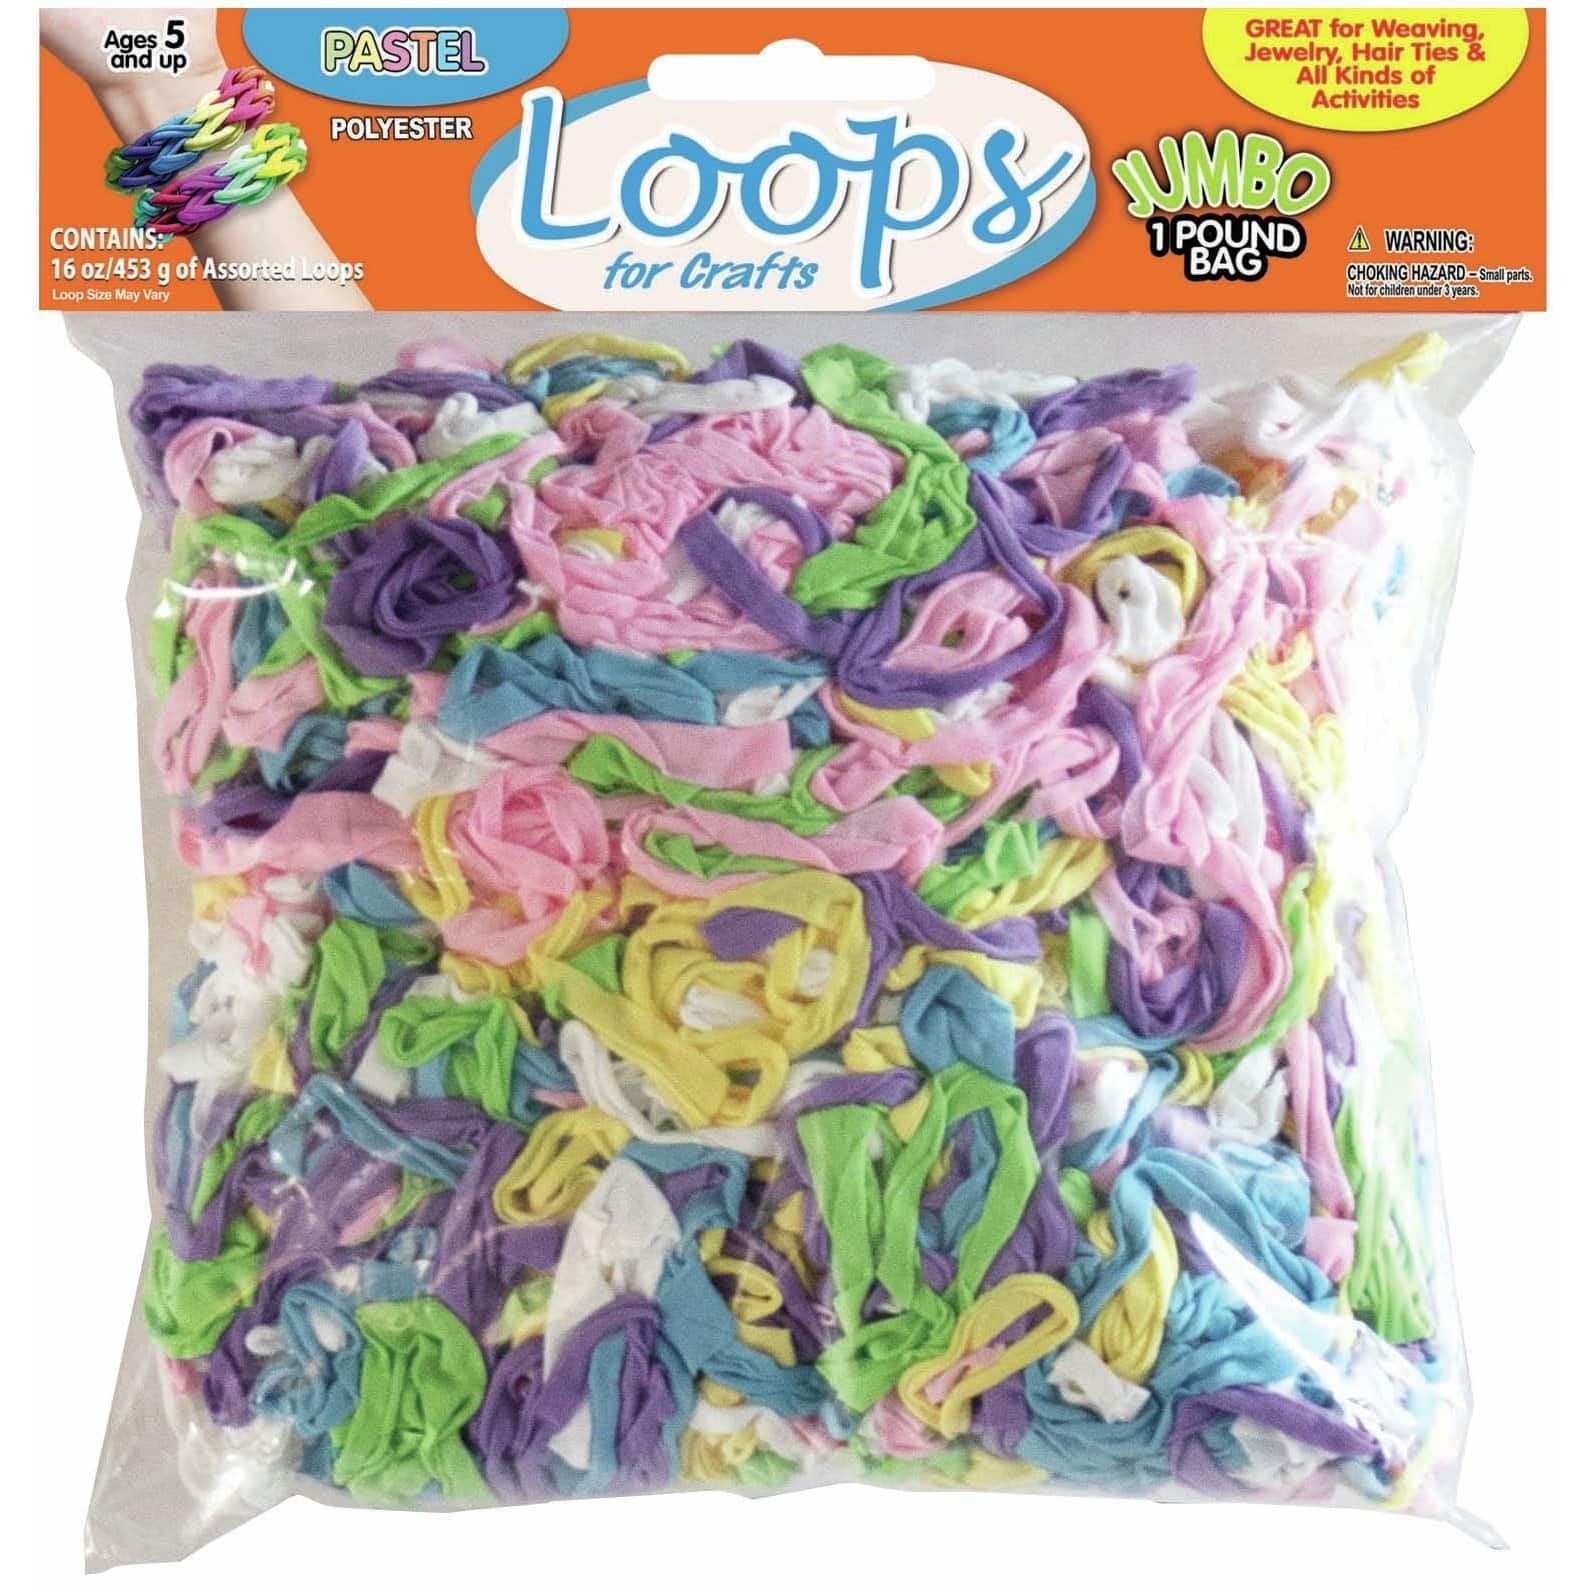 Pepperell Pastel Braiding Polyester Loops